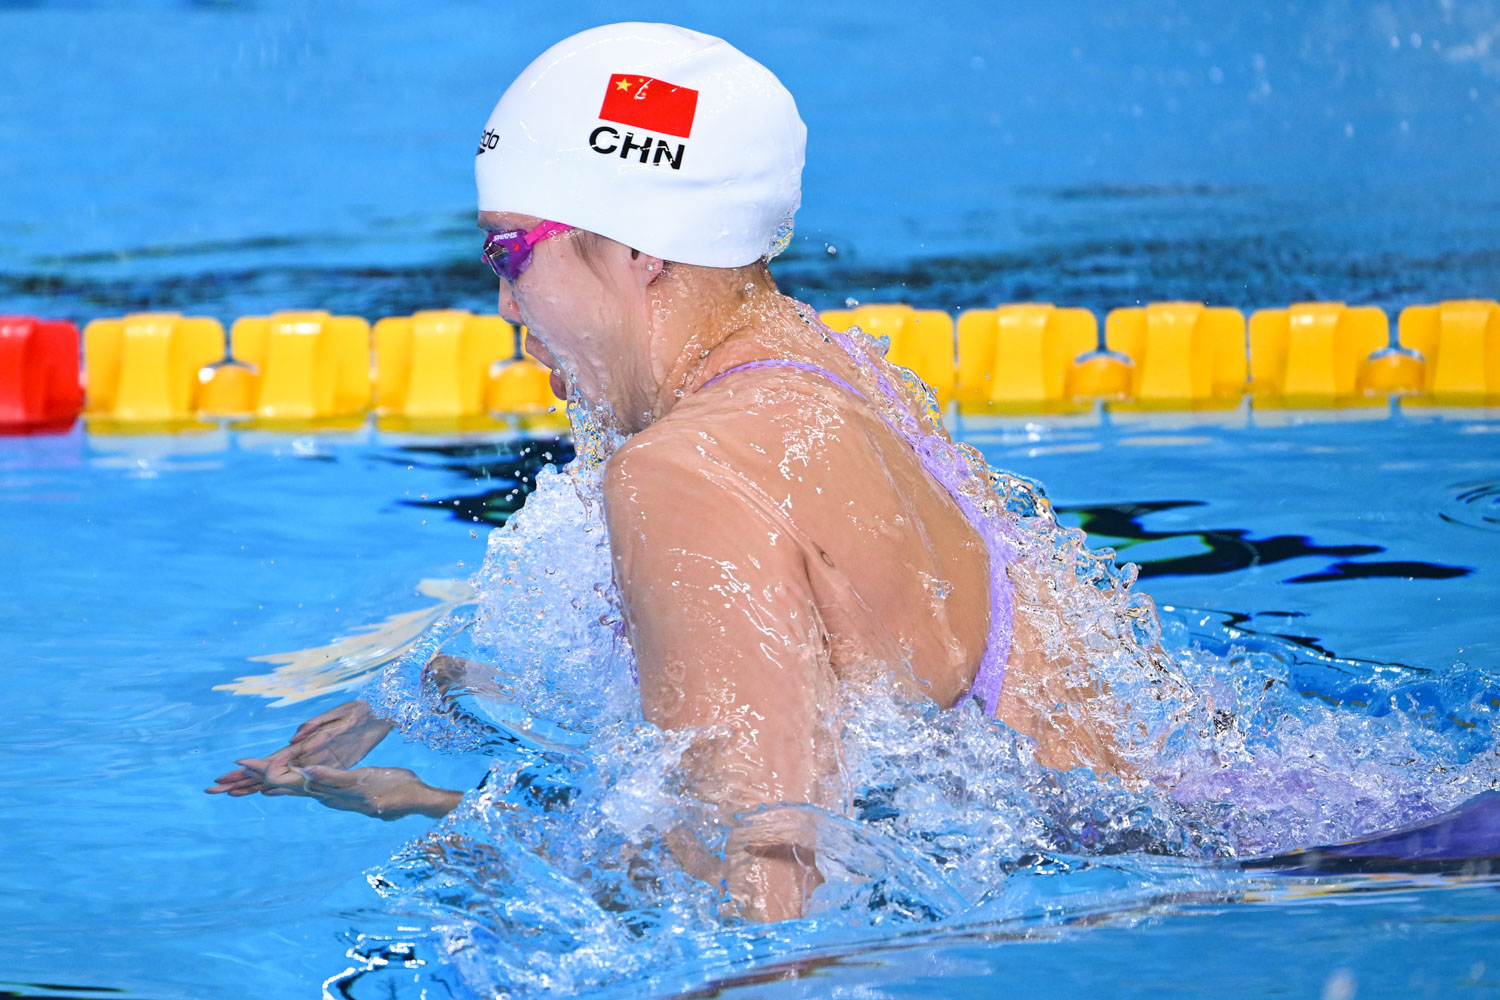 Tang Qianting Breaks 100 Breast Asian Record with Time of 1:04.39 to Become World Champion